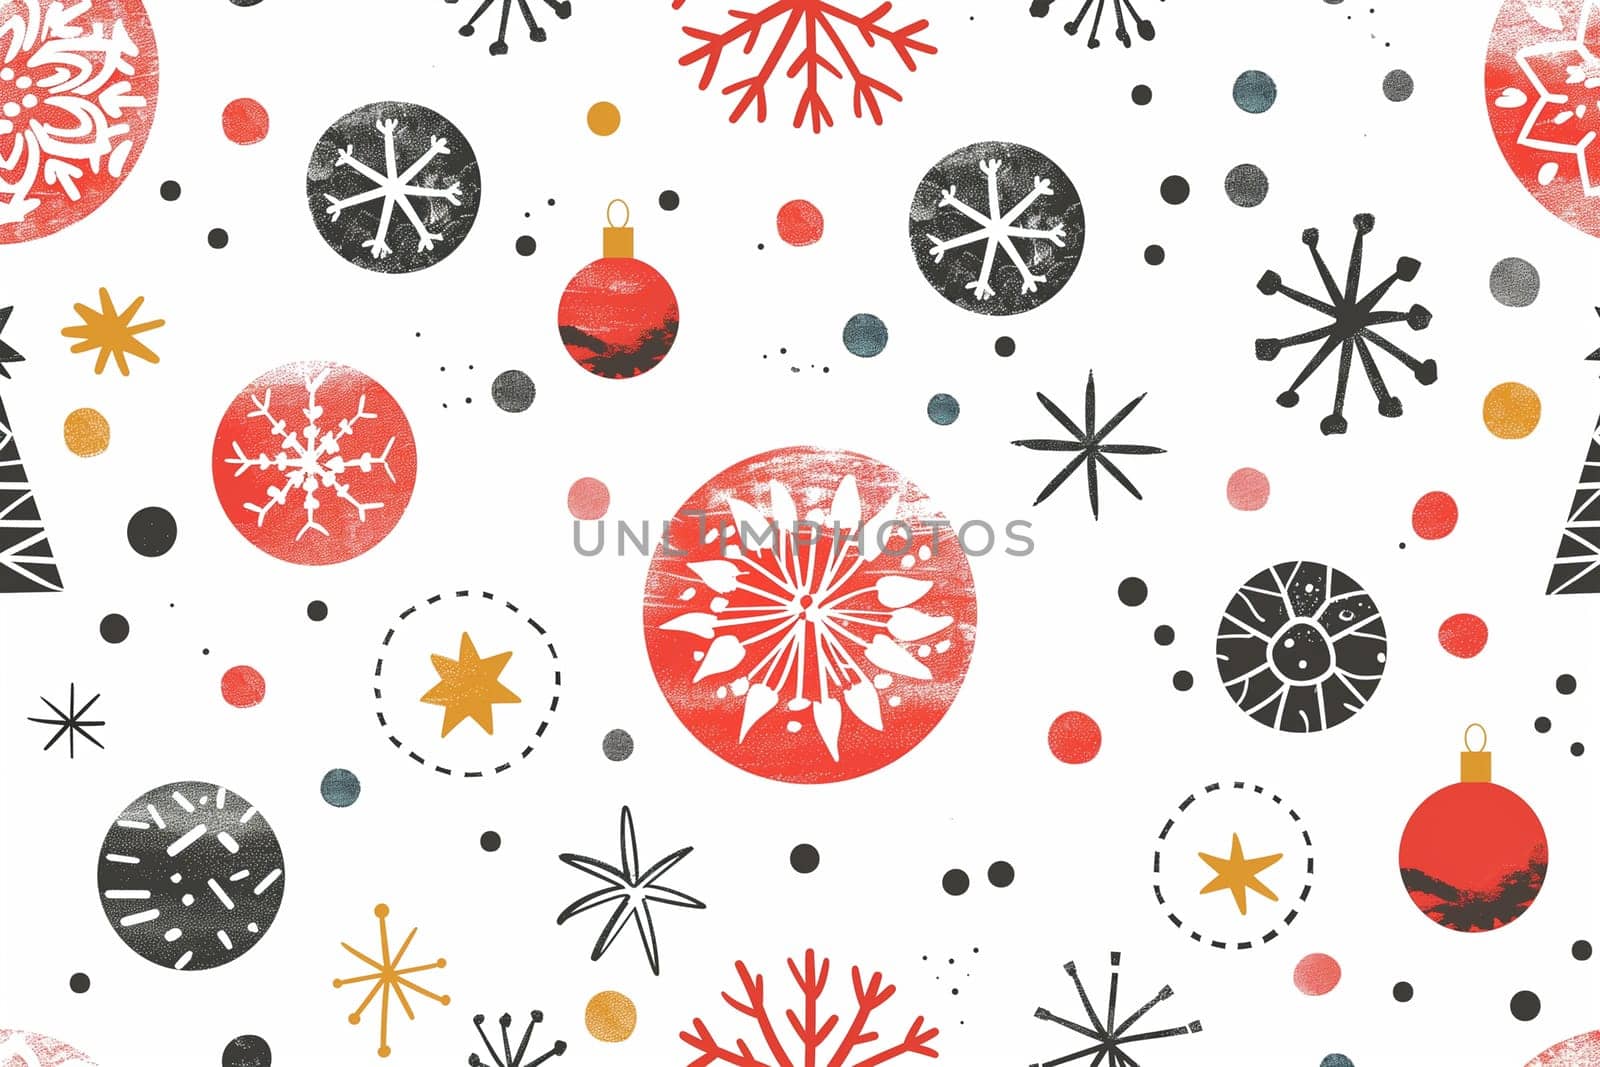 White Background With Red and Black Ornaments by Sd28DimoN_1976